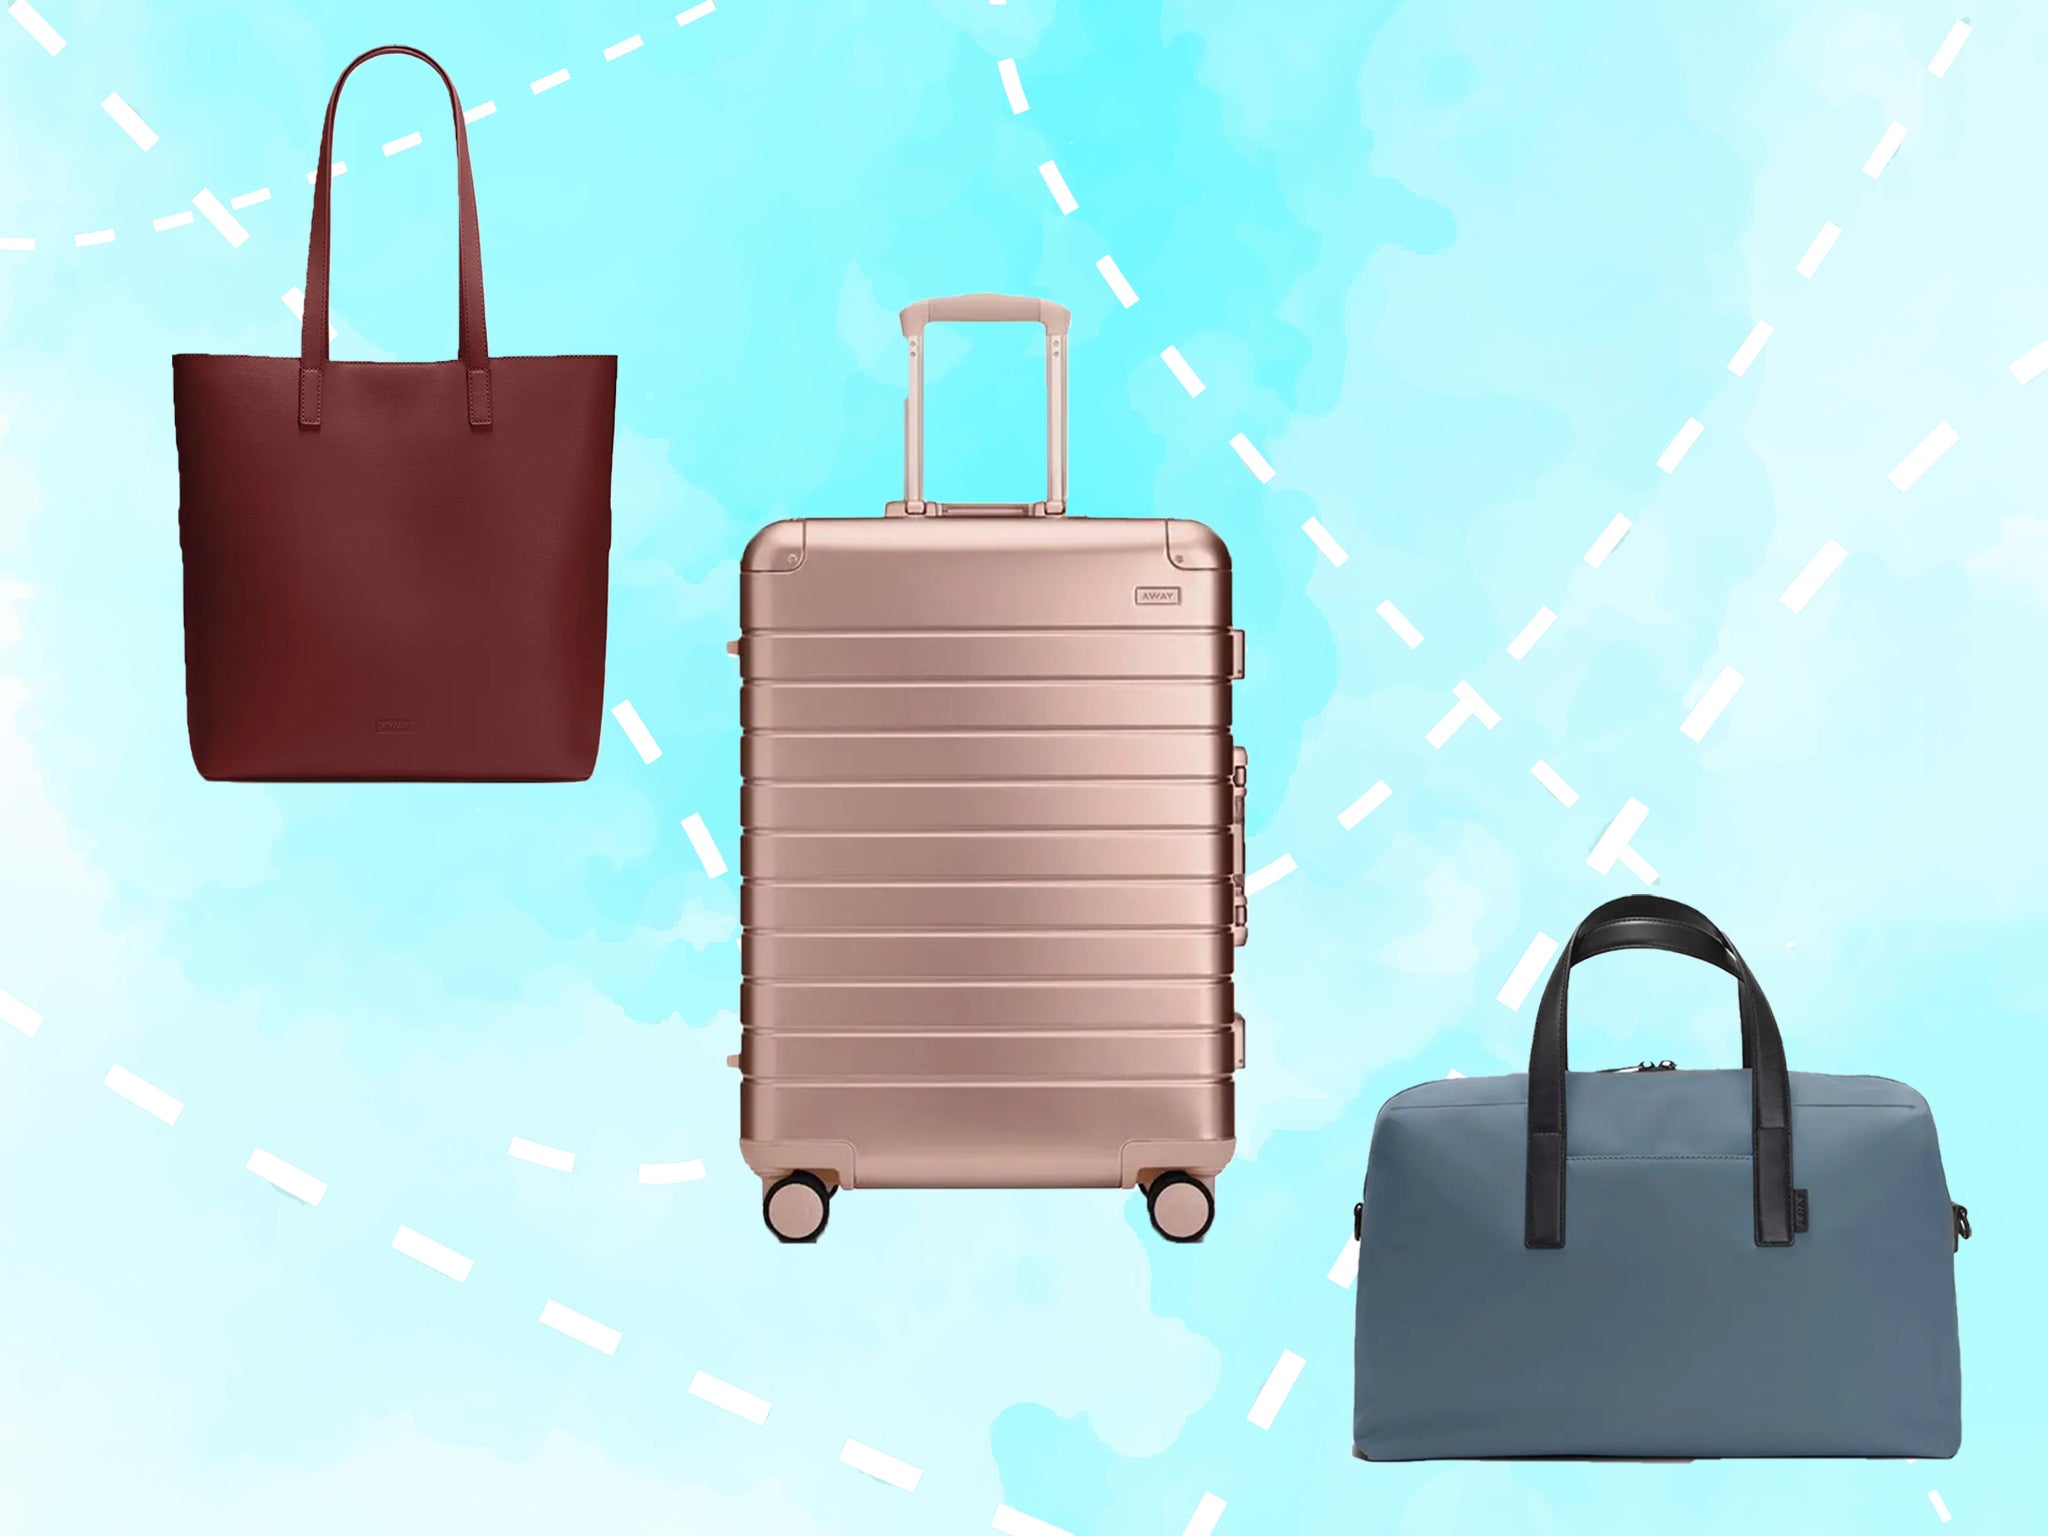 The Original Carry-On suitcase | Away: Built for modern travel